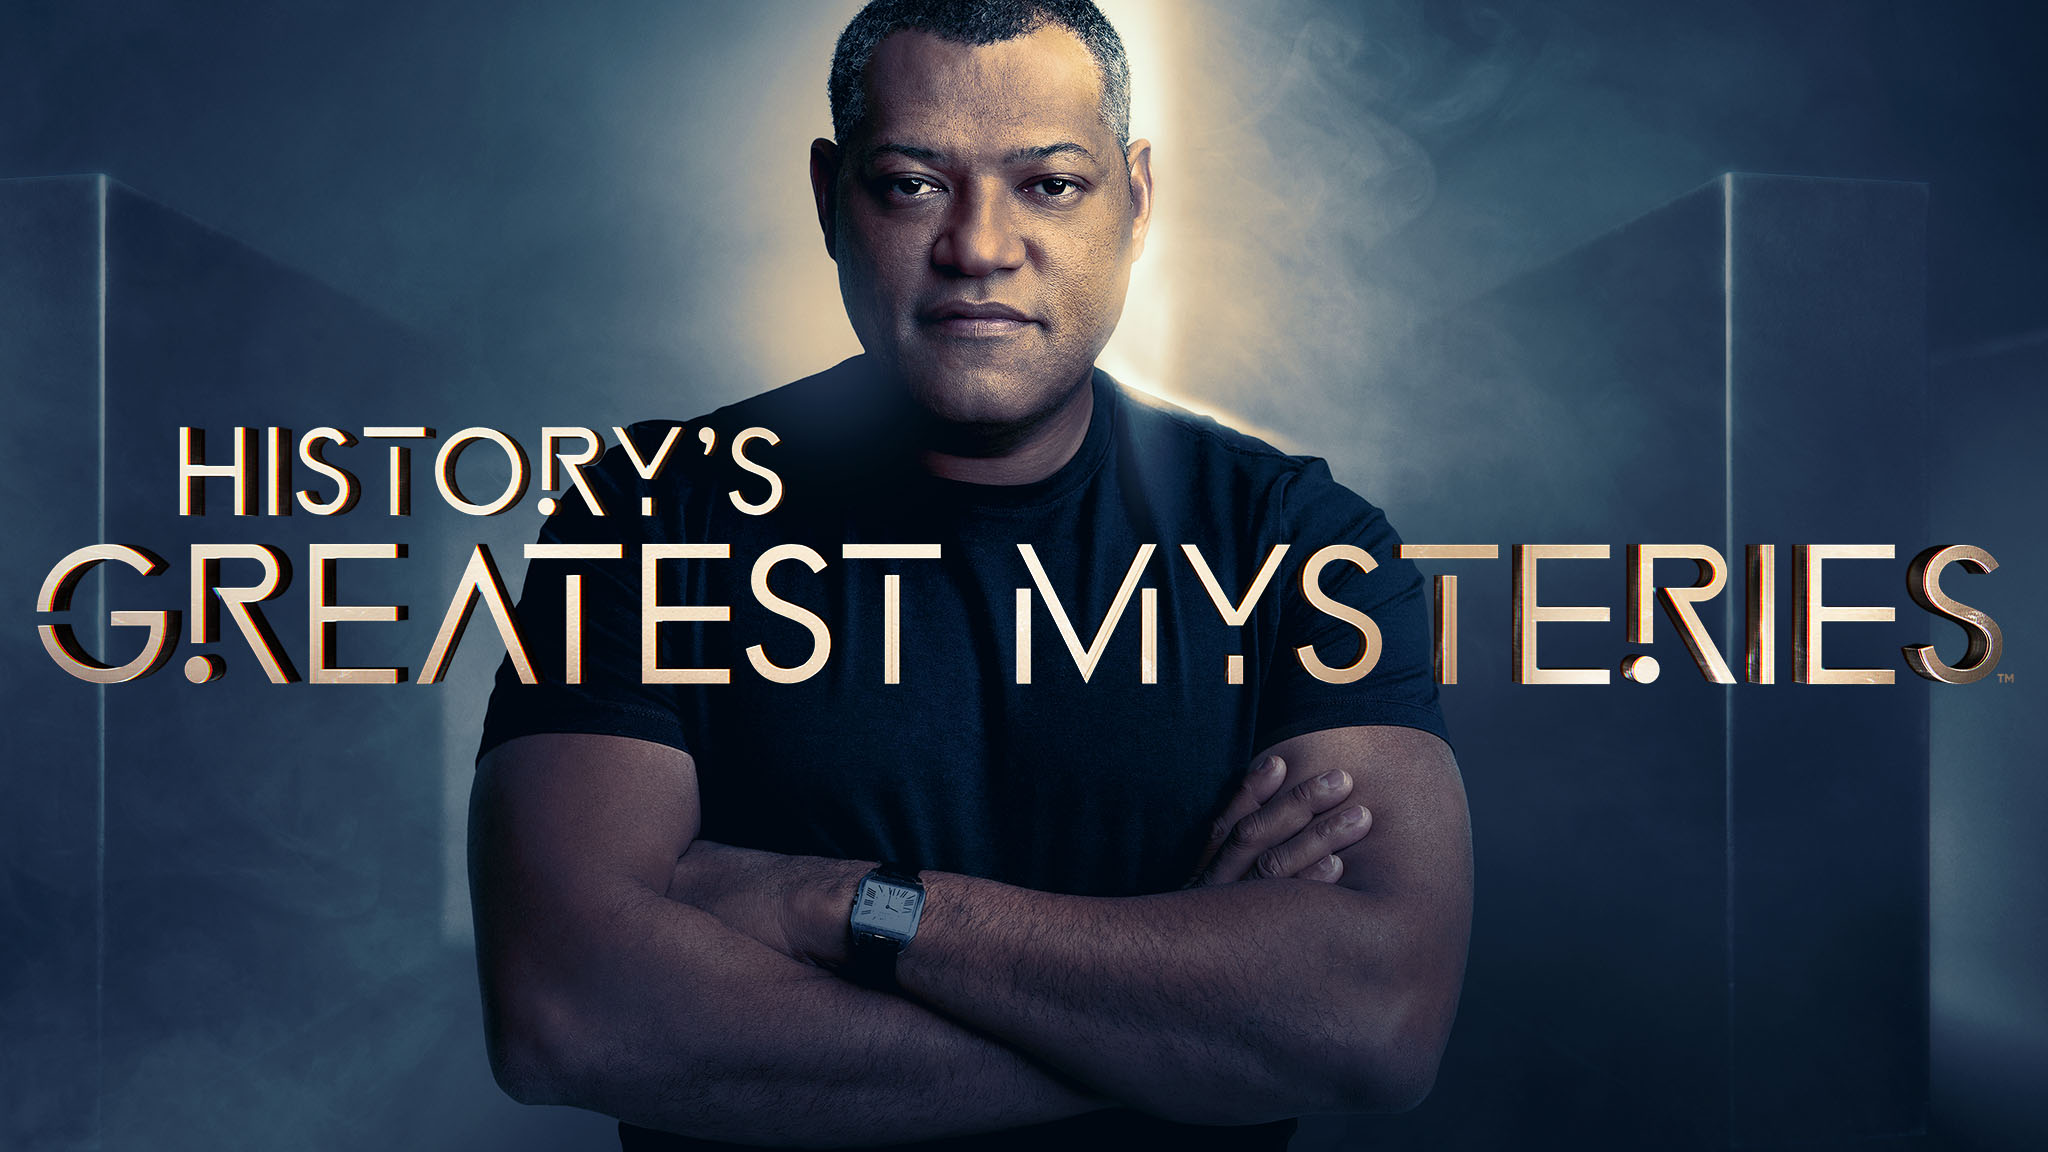 Watch 'History's Greatest Mysteries' on HISTORY Vault!